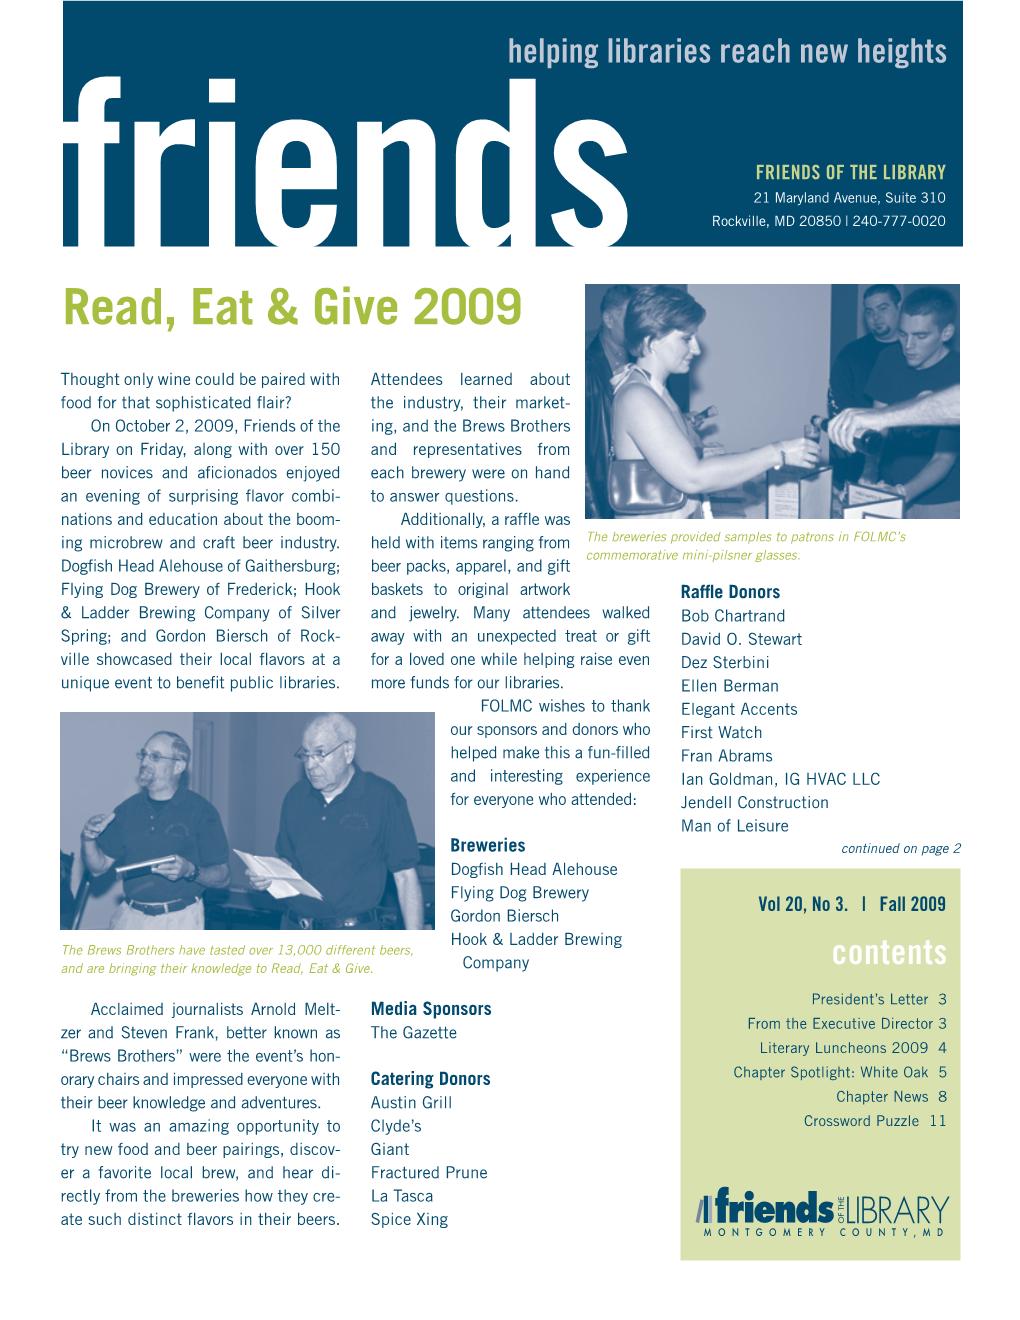 Read, Eat & Give 2009